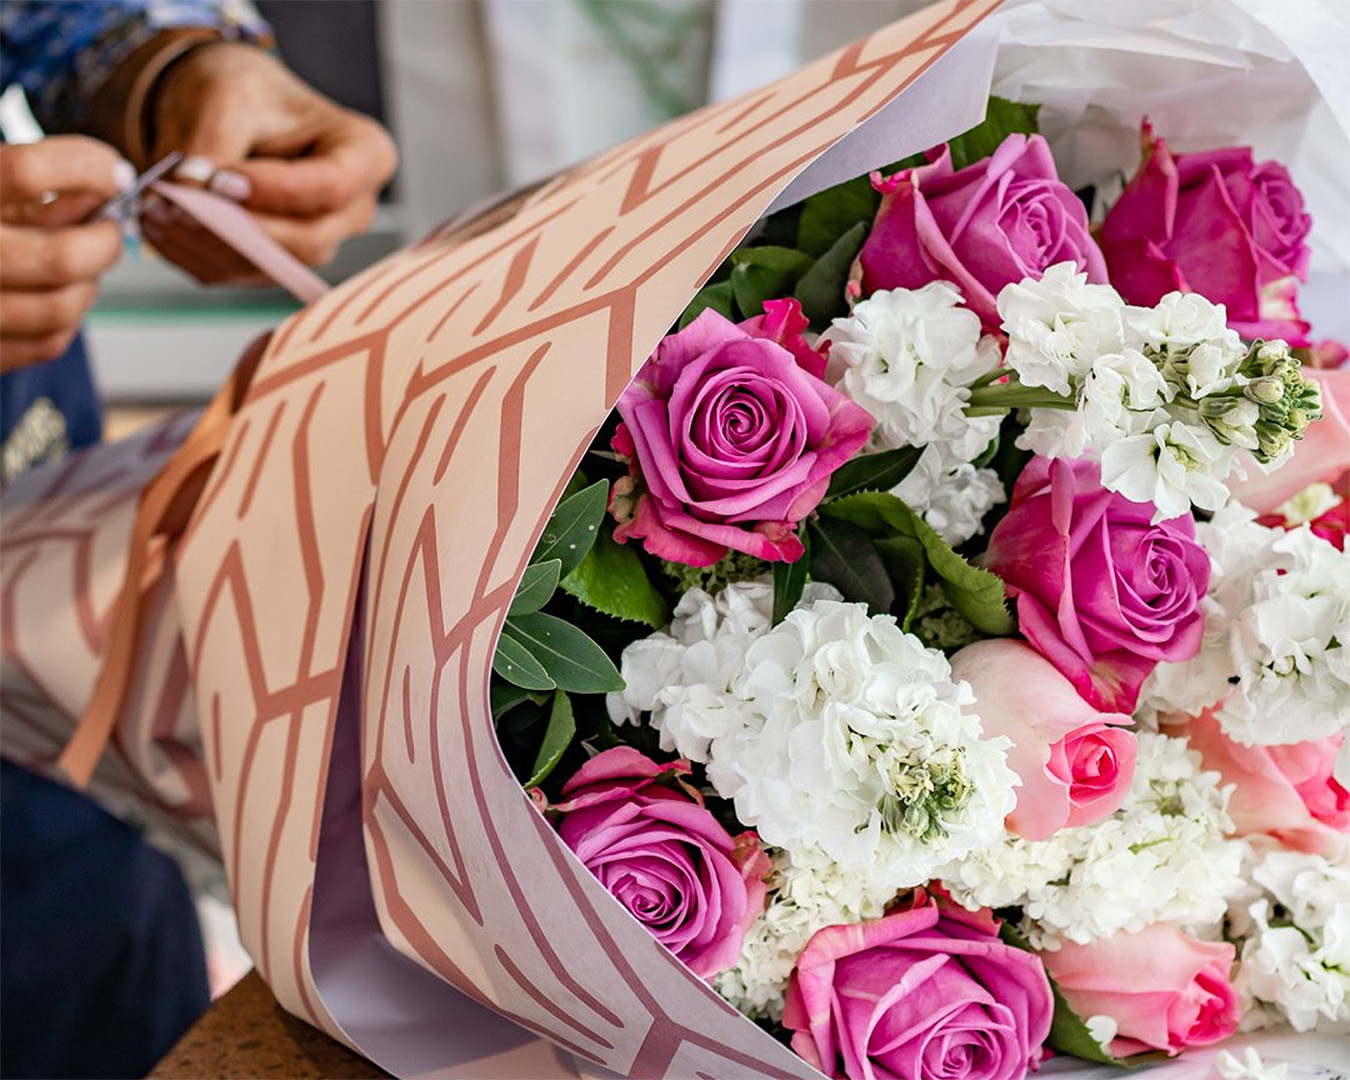 Someone adds the finishing touches to a lovely bouquet from Flowers after hours.